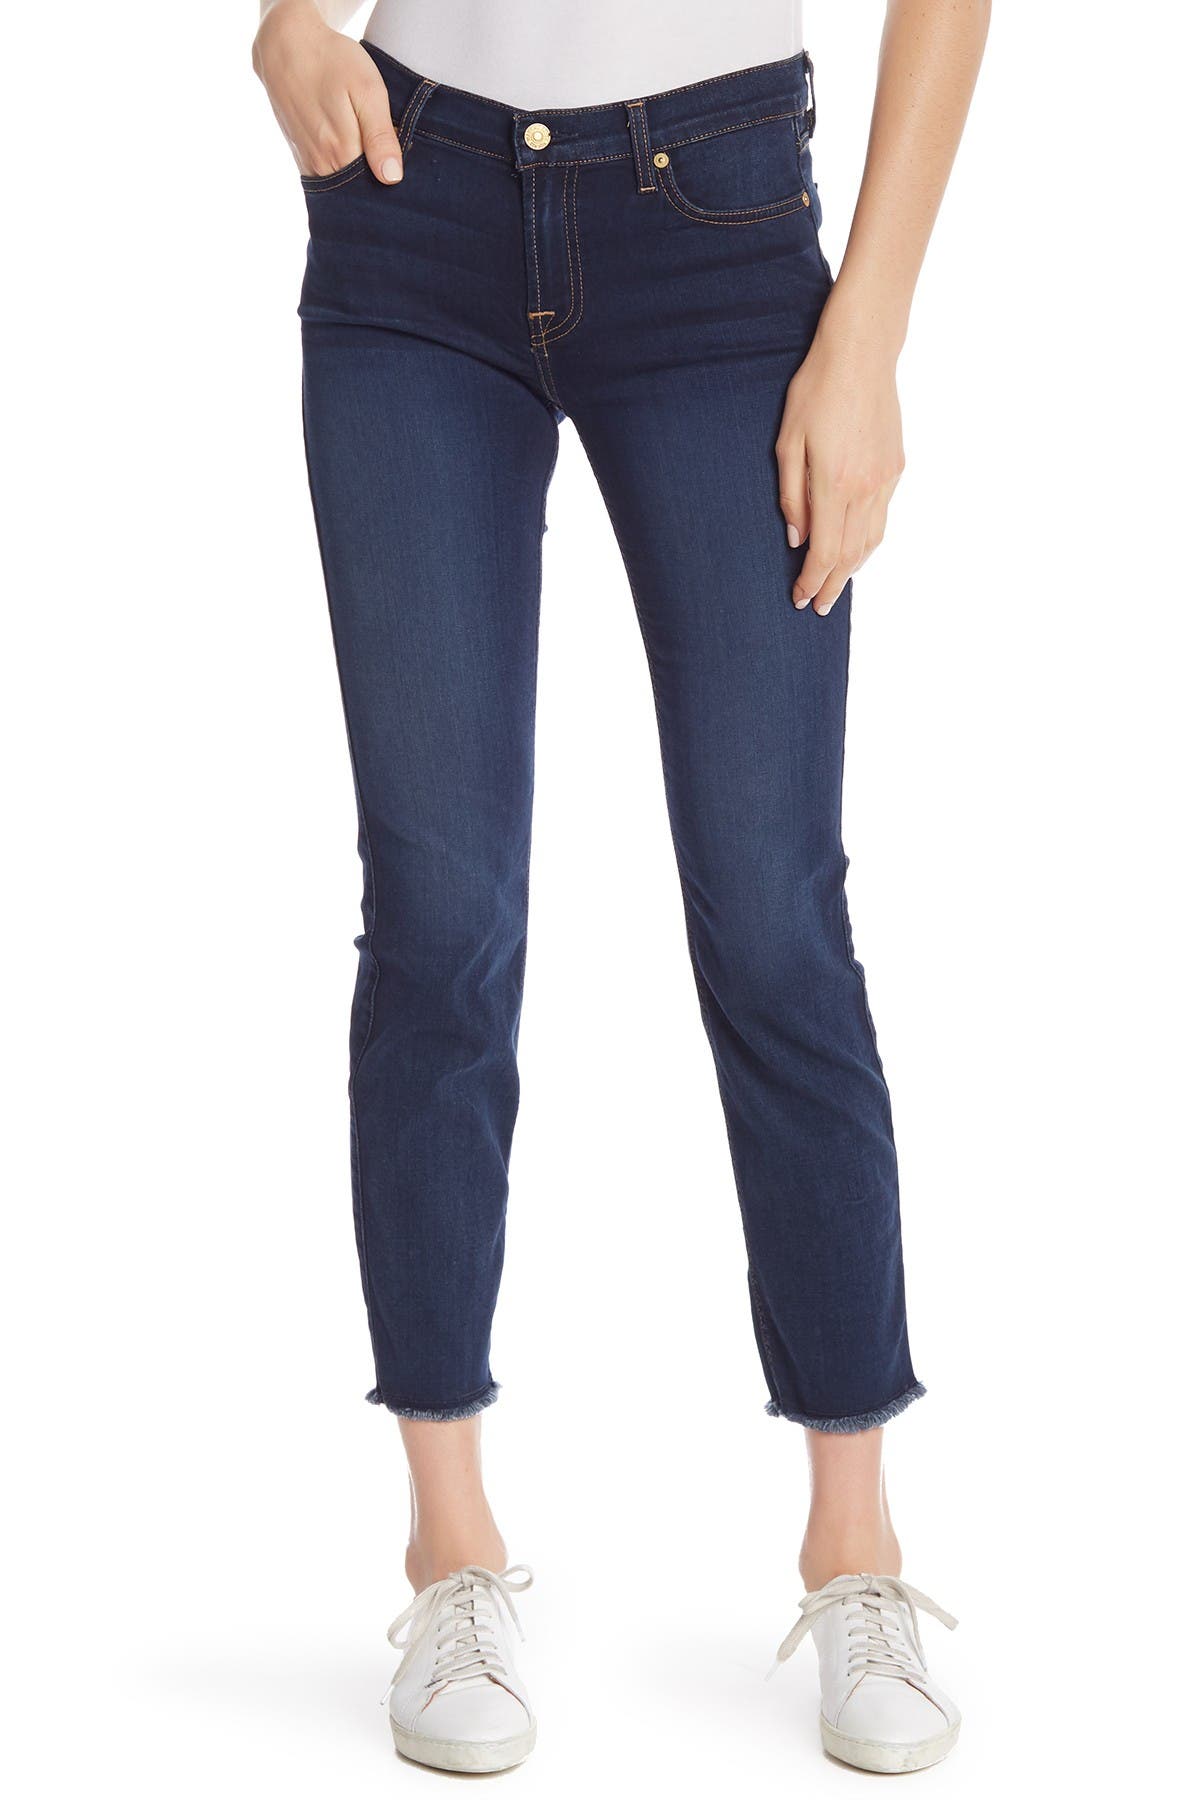 7 for all mankind roxanne ankle frayed hem jeans